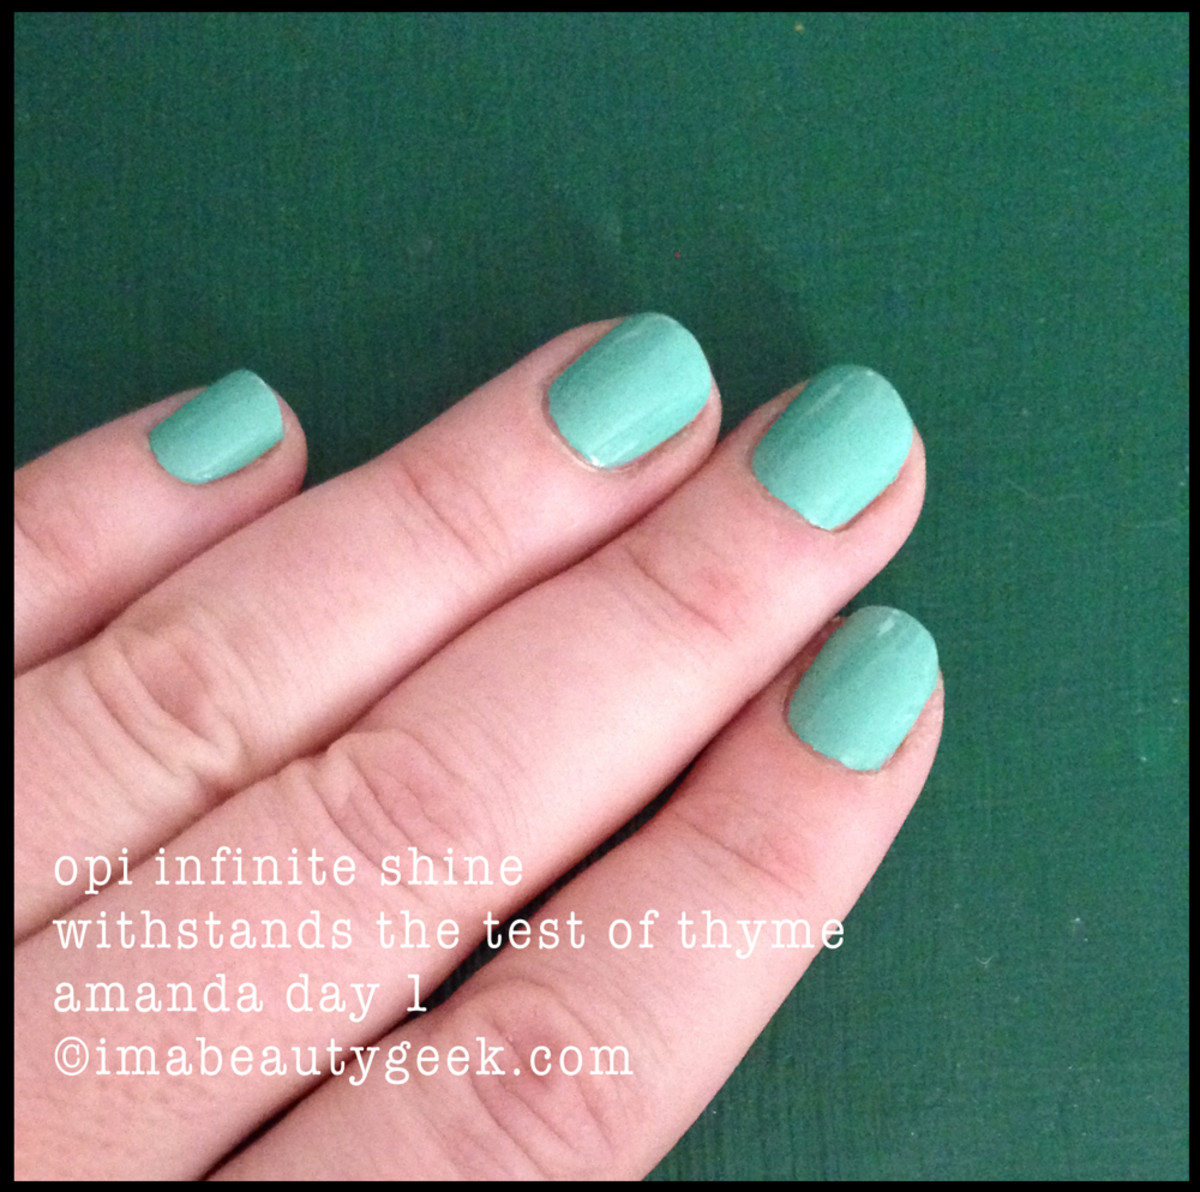 OPI Infinite Shine Review Withstands the Test of Thyme